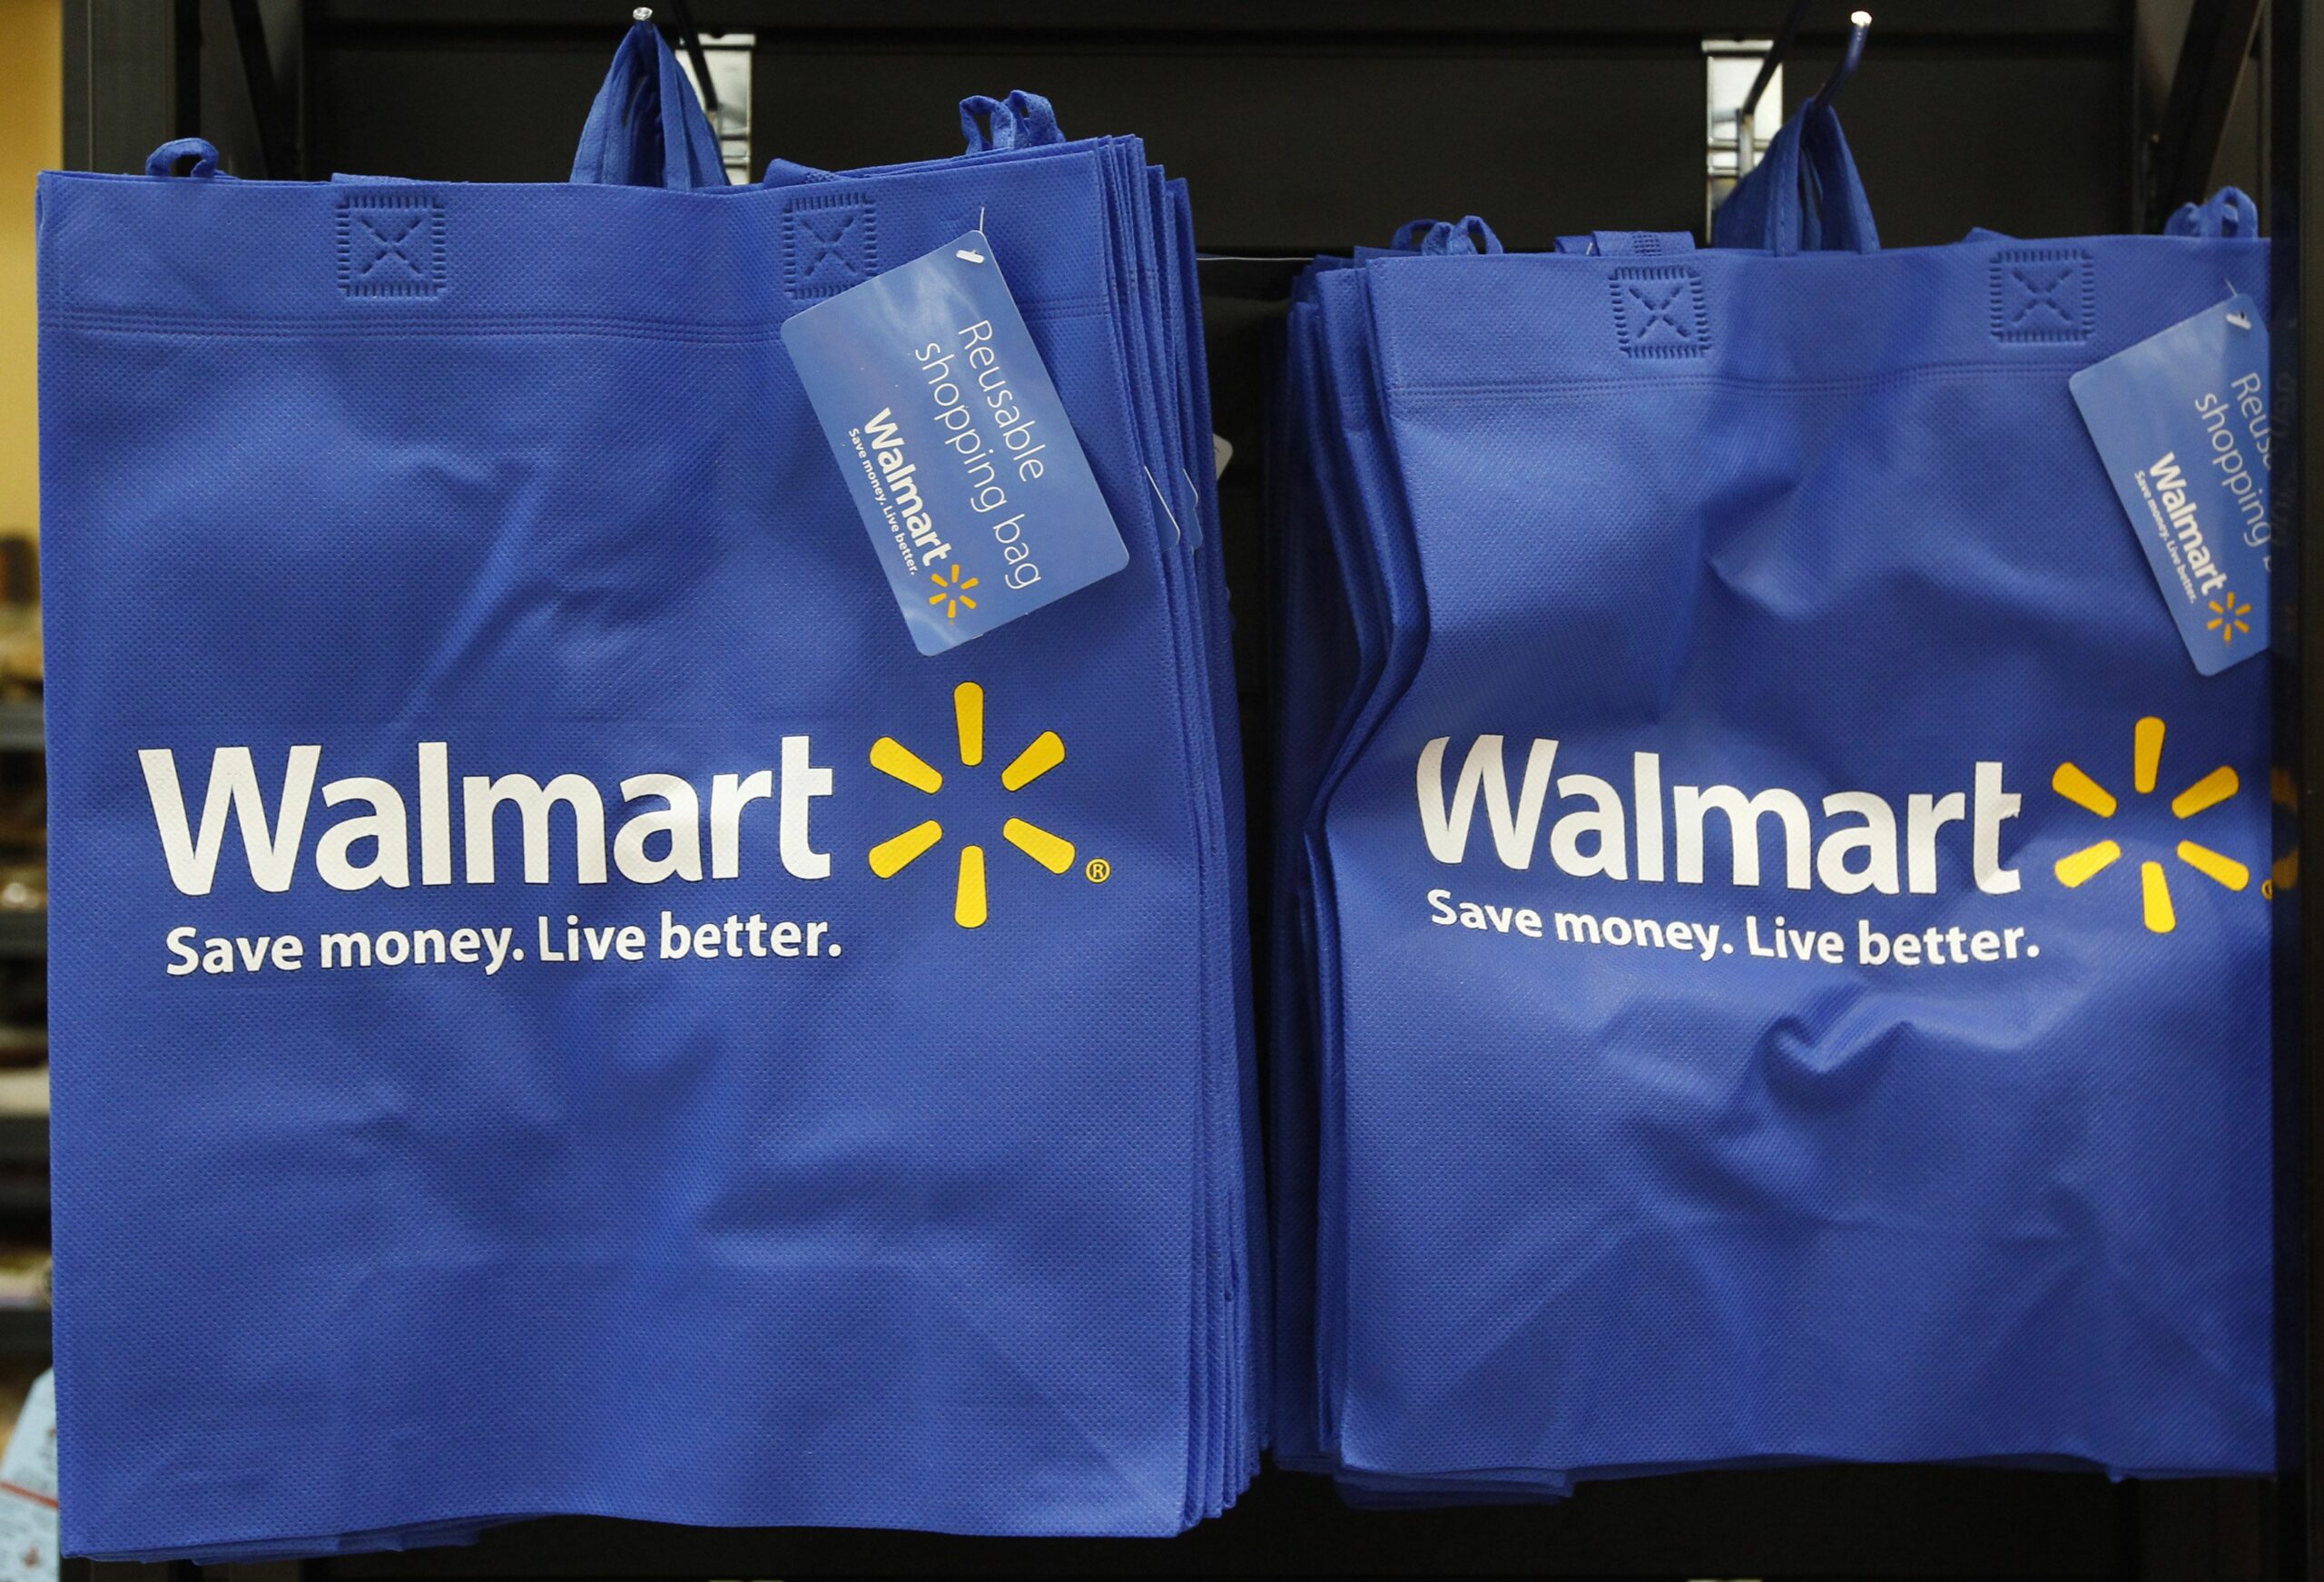 Walmart Unveils “The Ultimate Life Breakthrough,” $ 98 Membership With Access To Gas, Grocery, And Free Delivery